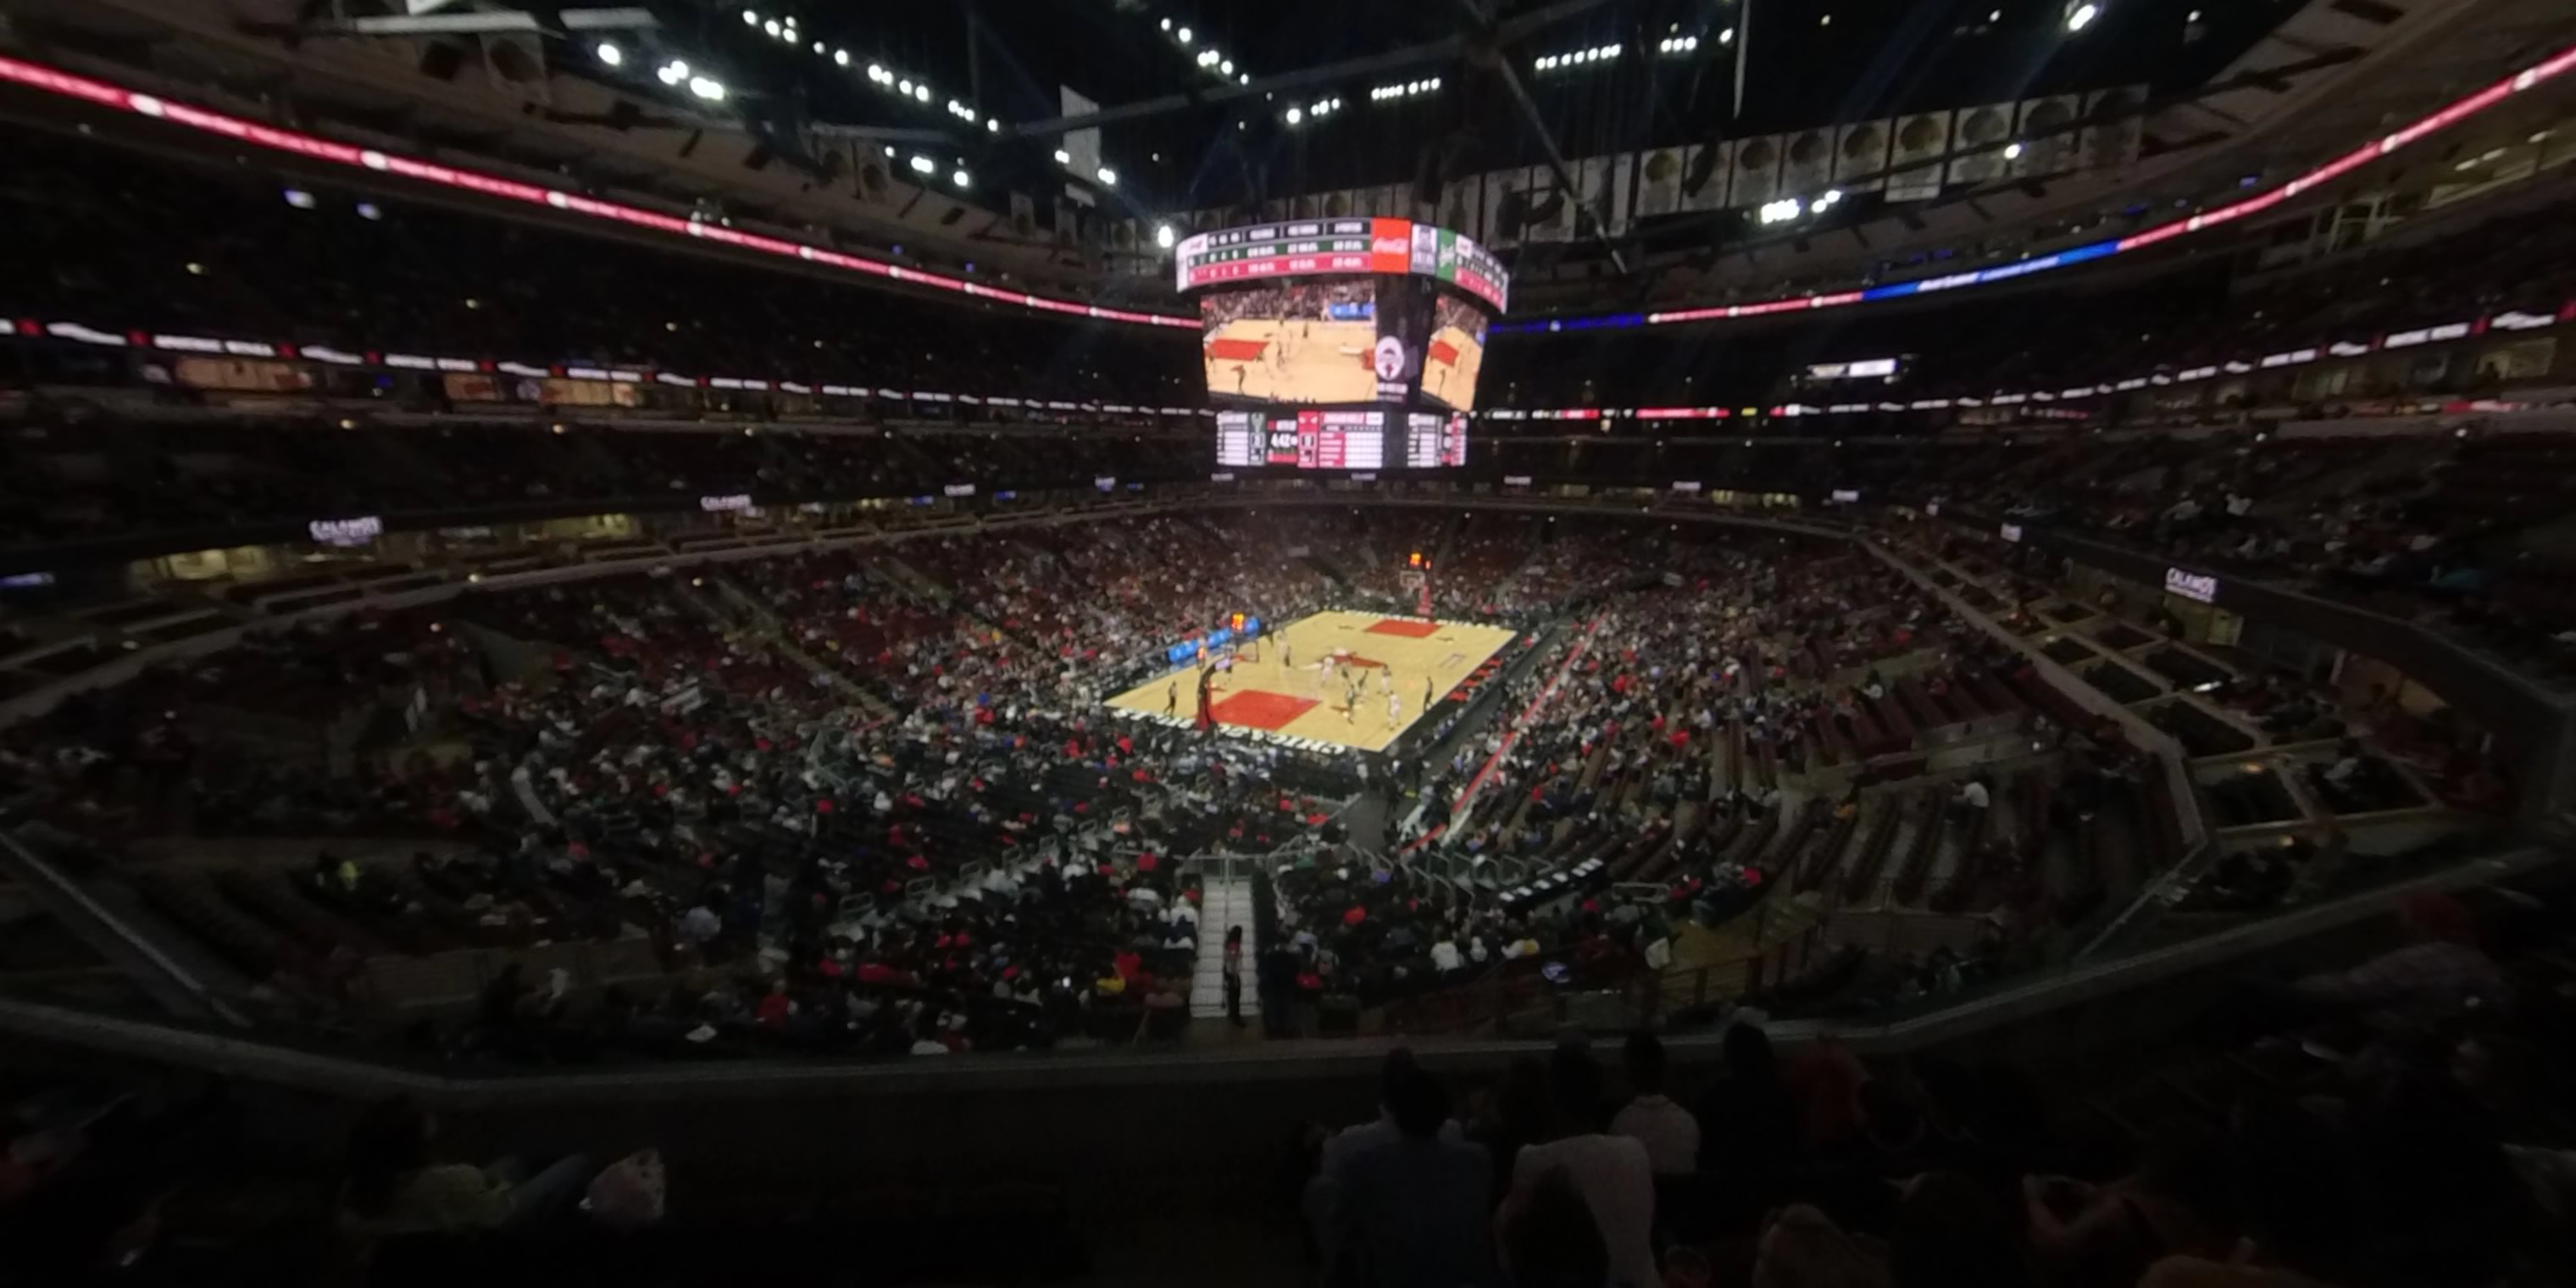 section 223 panoramic seat view  for basketball - united center